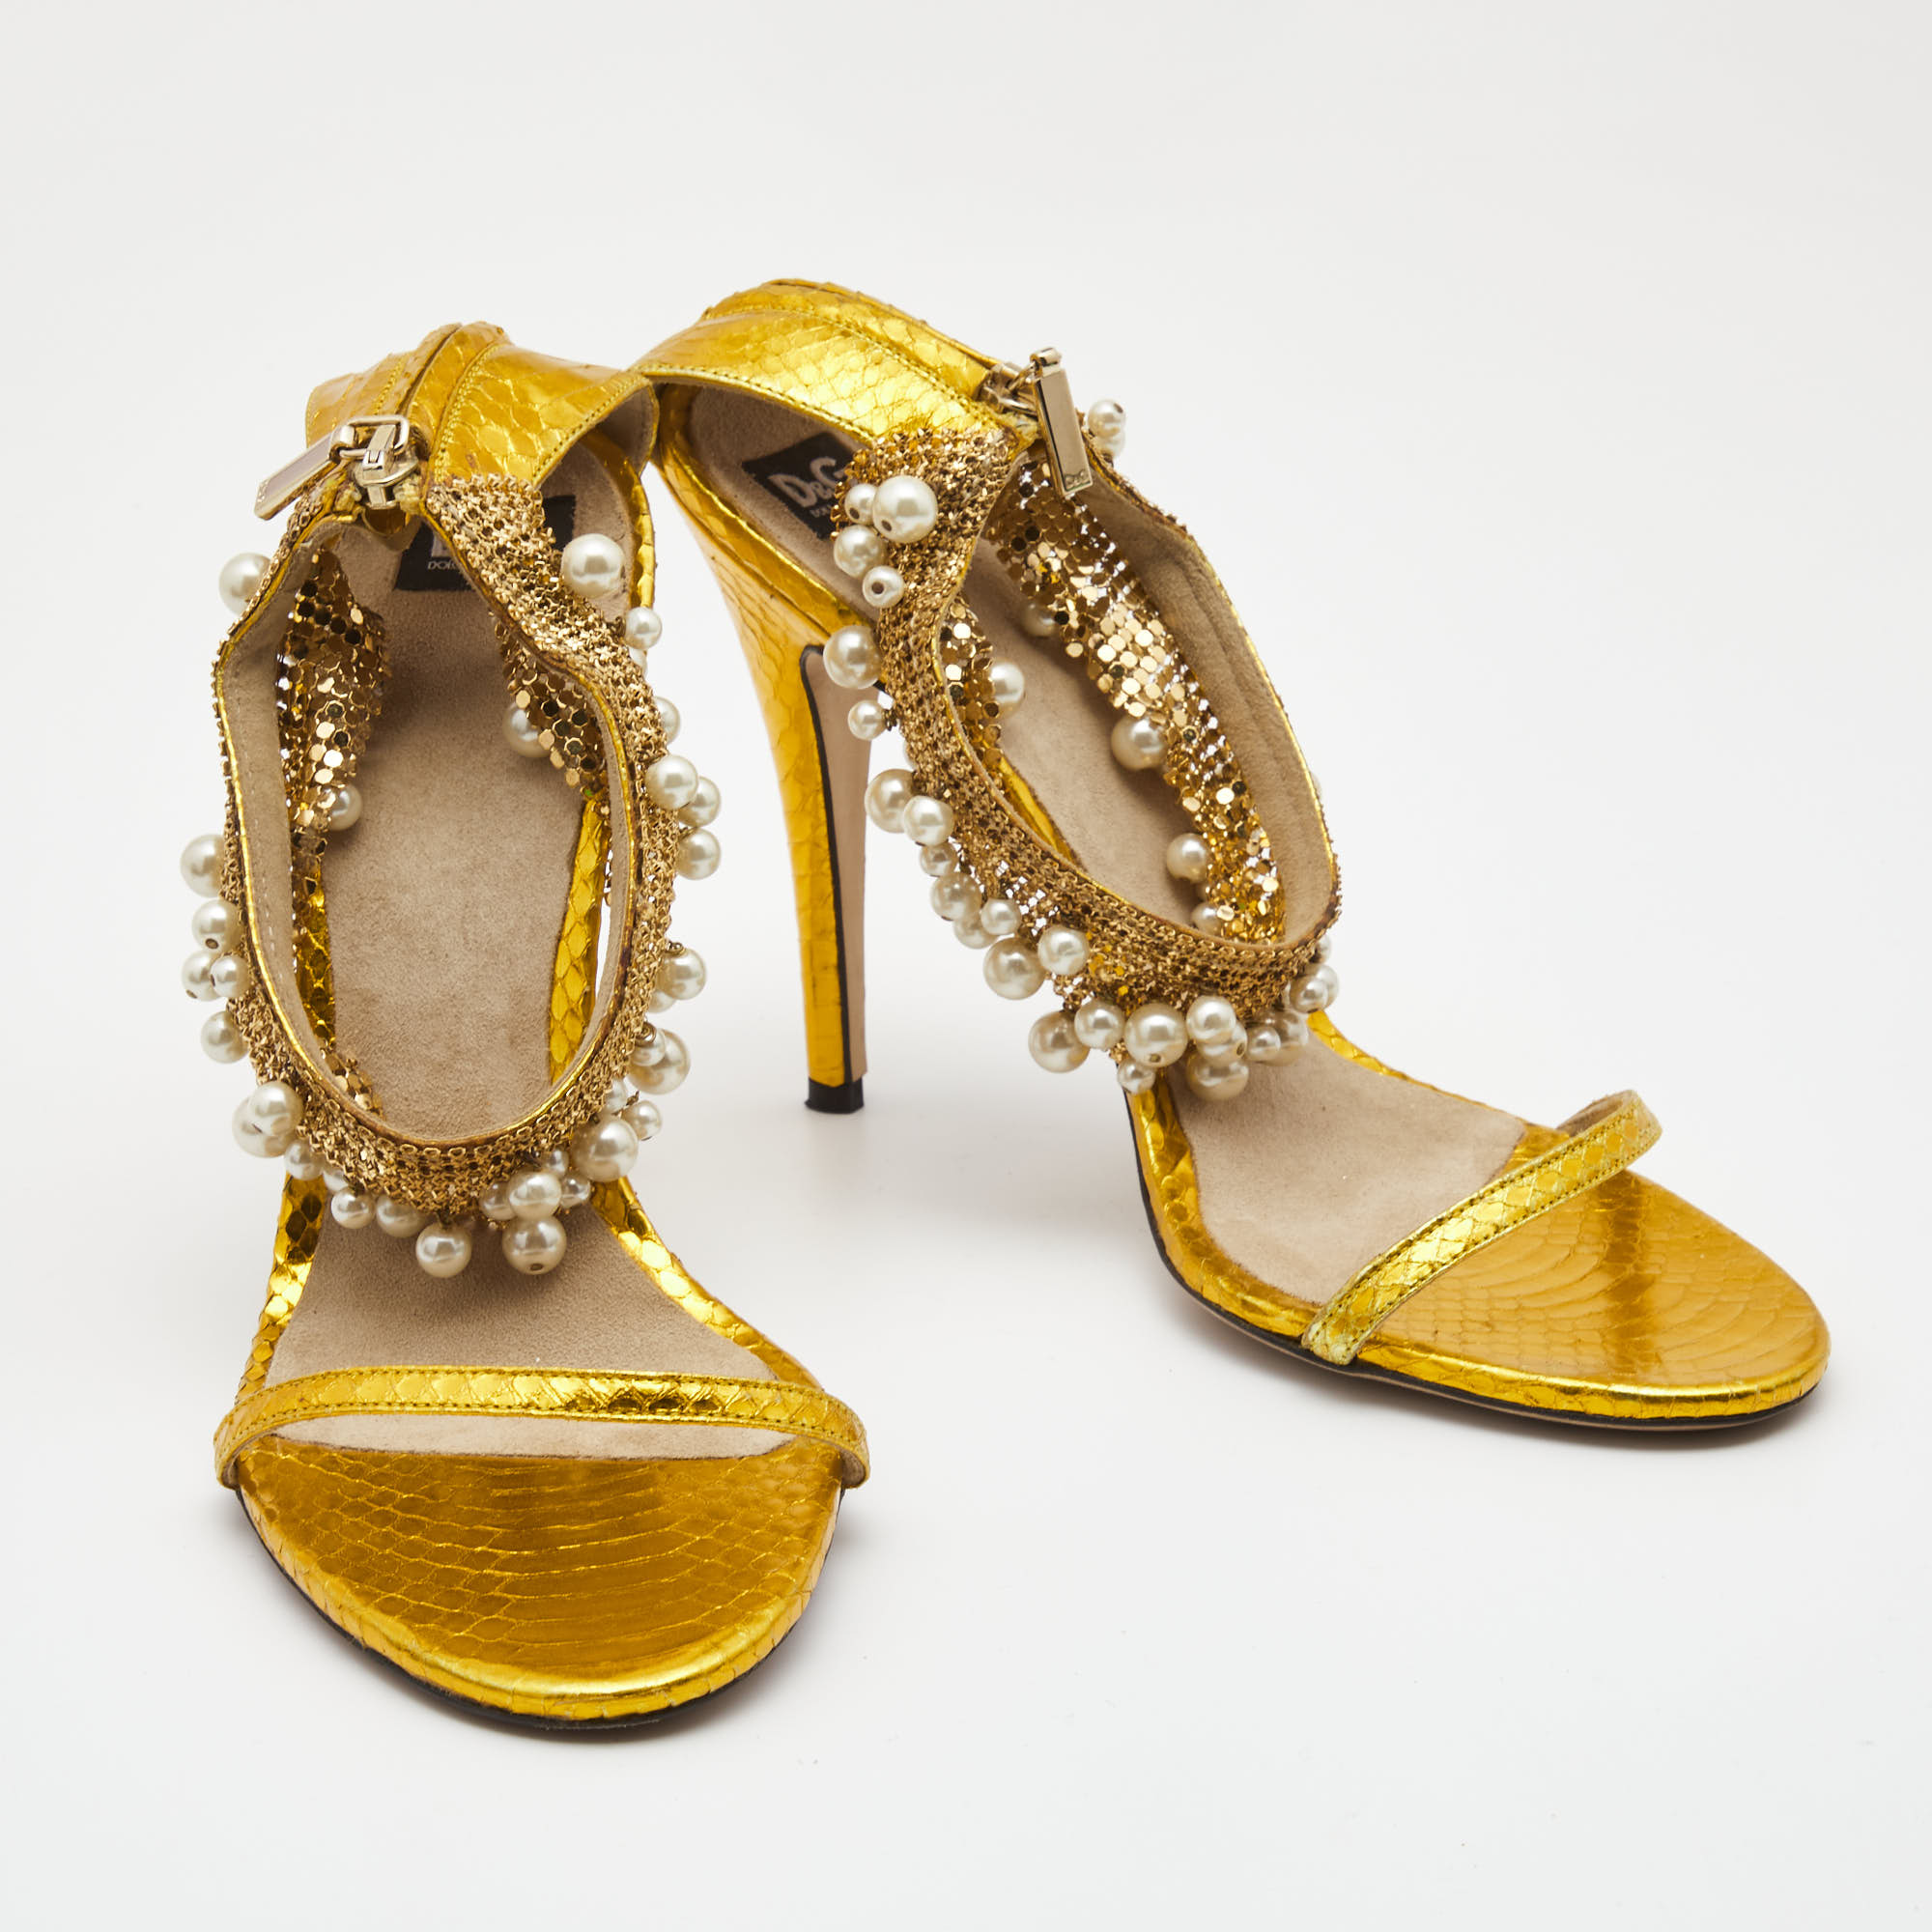 Dolce & Gabbana Metallic Yellow Python Embossed Leather Embellished Ankle Strap Sandals Size 40